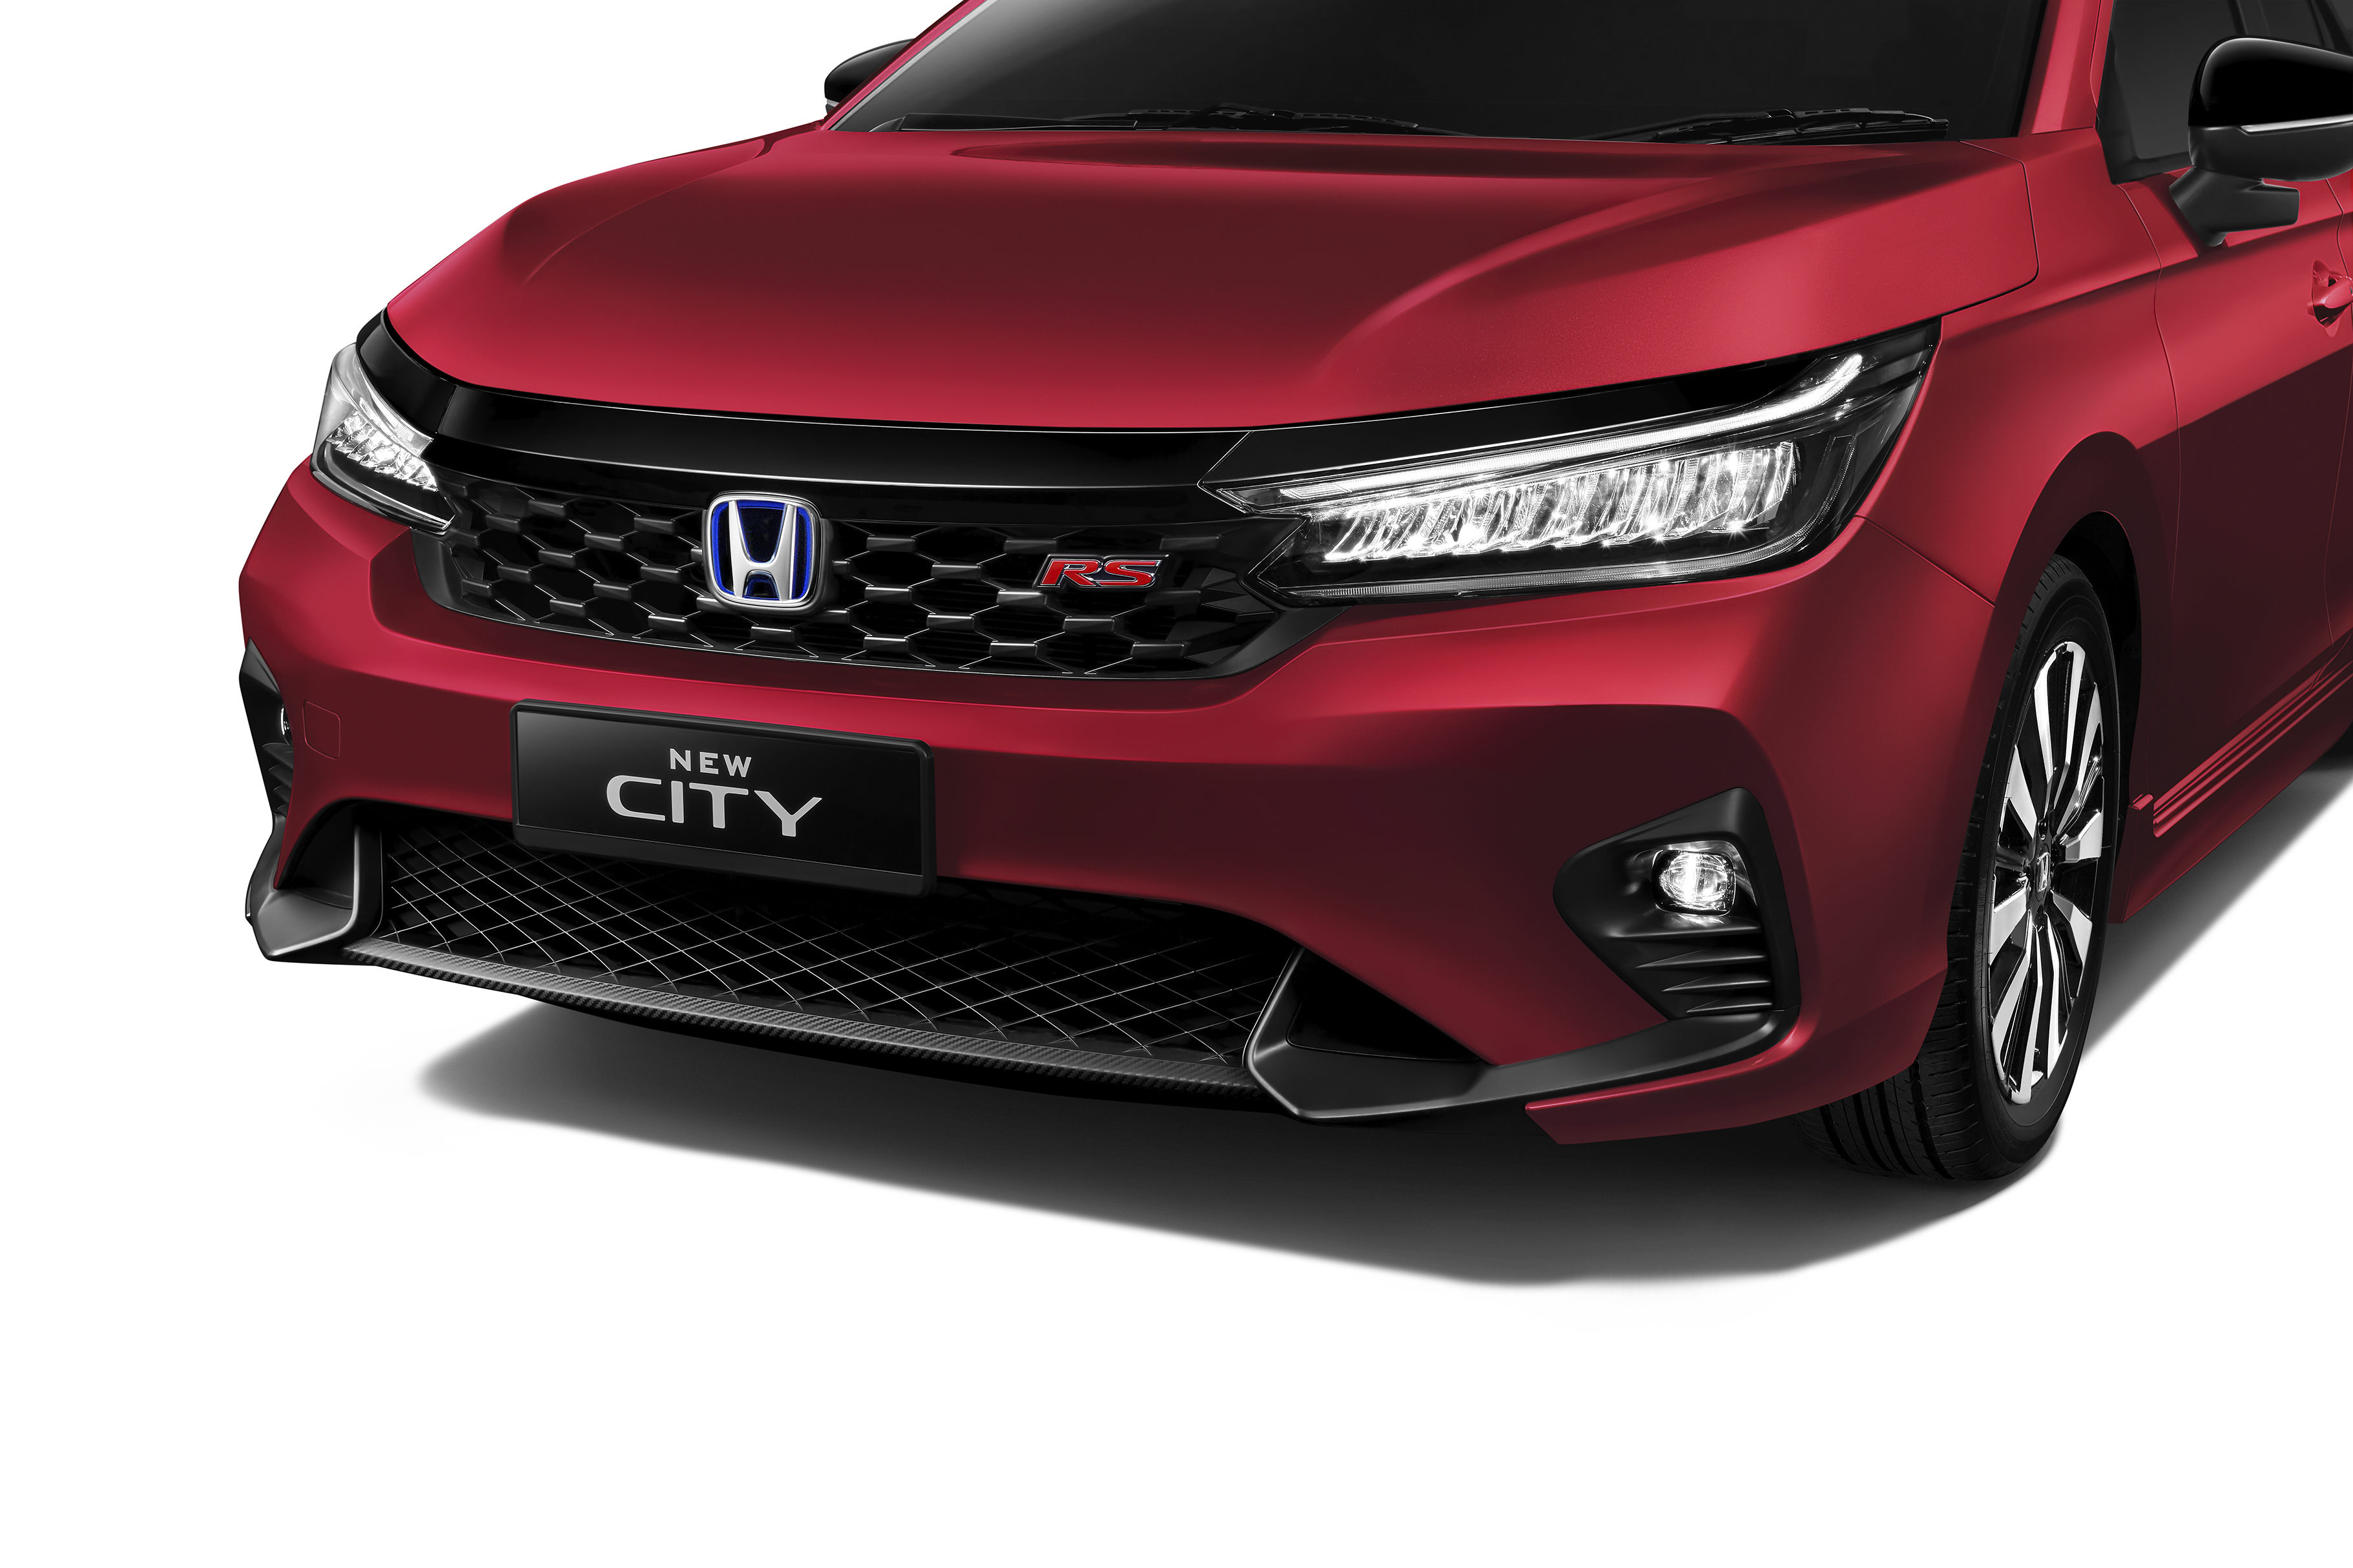 The New City RS’s exterior upgrades include New Honeycomb Front Grille, New Front Lower Grille.